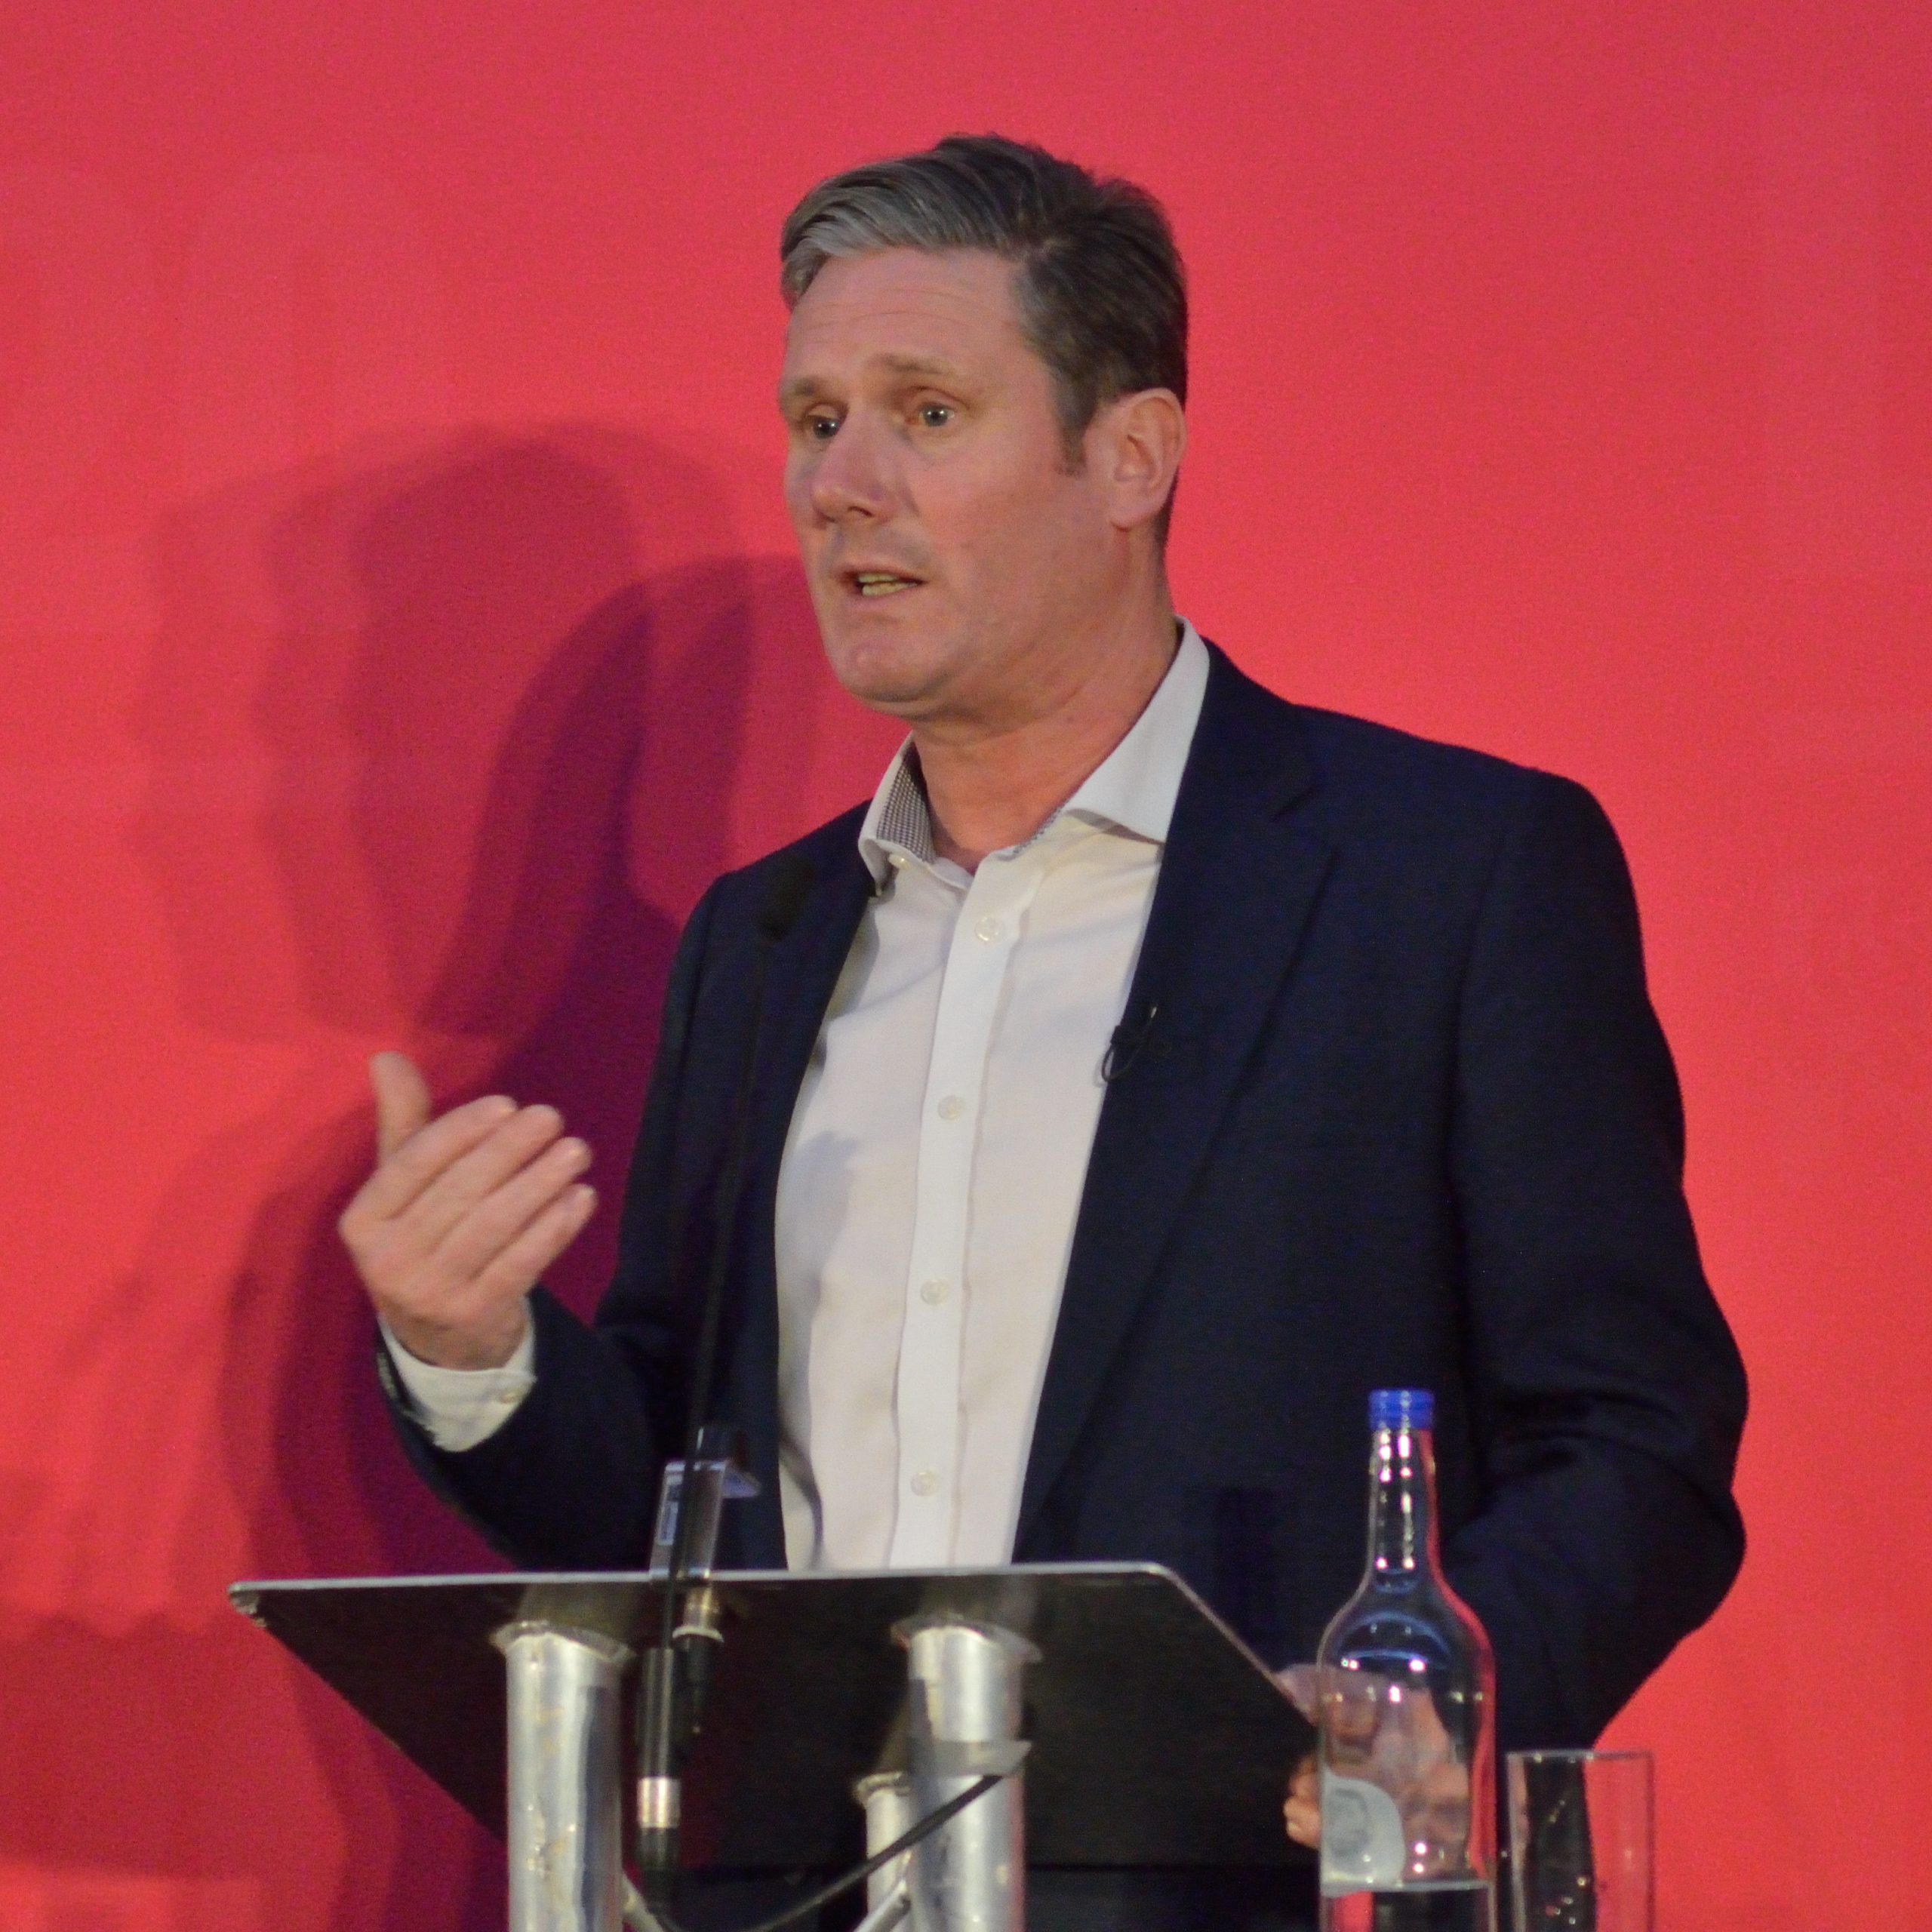 Why is Keir Starmer Experiencing Labour Pains?